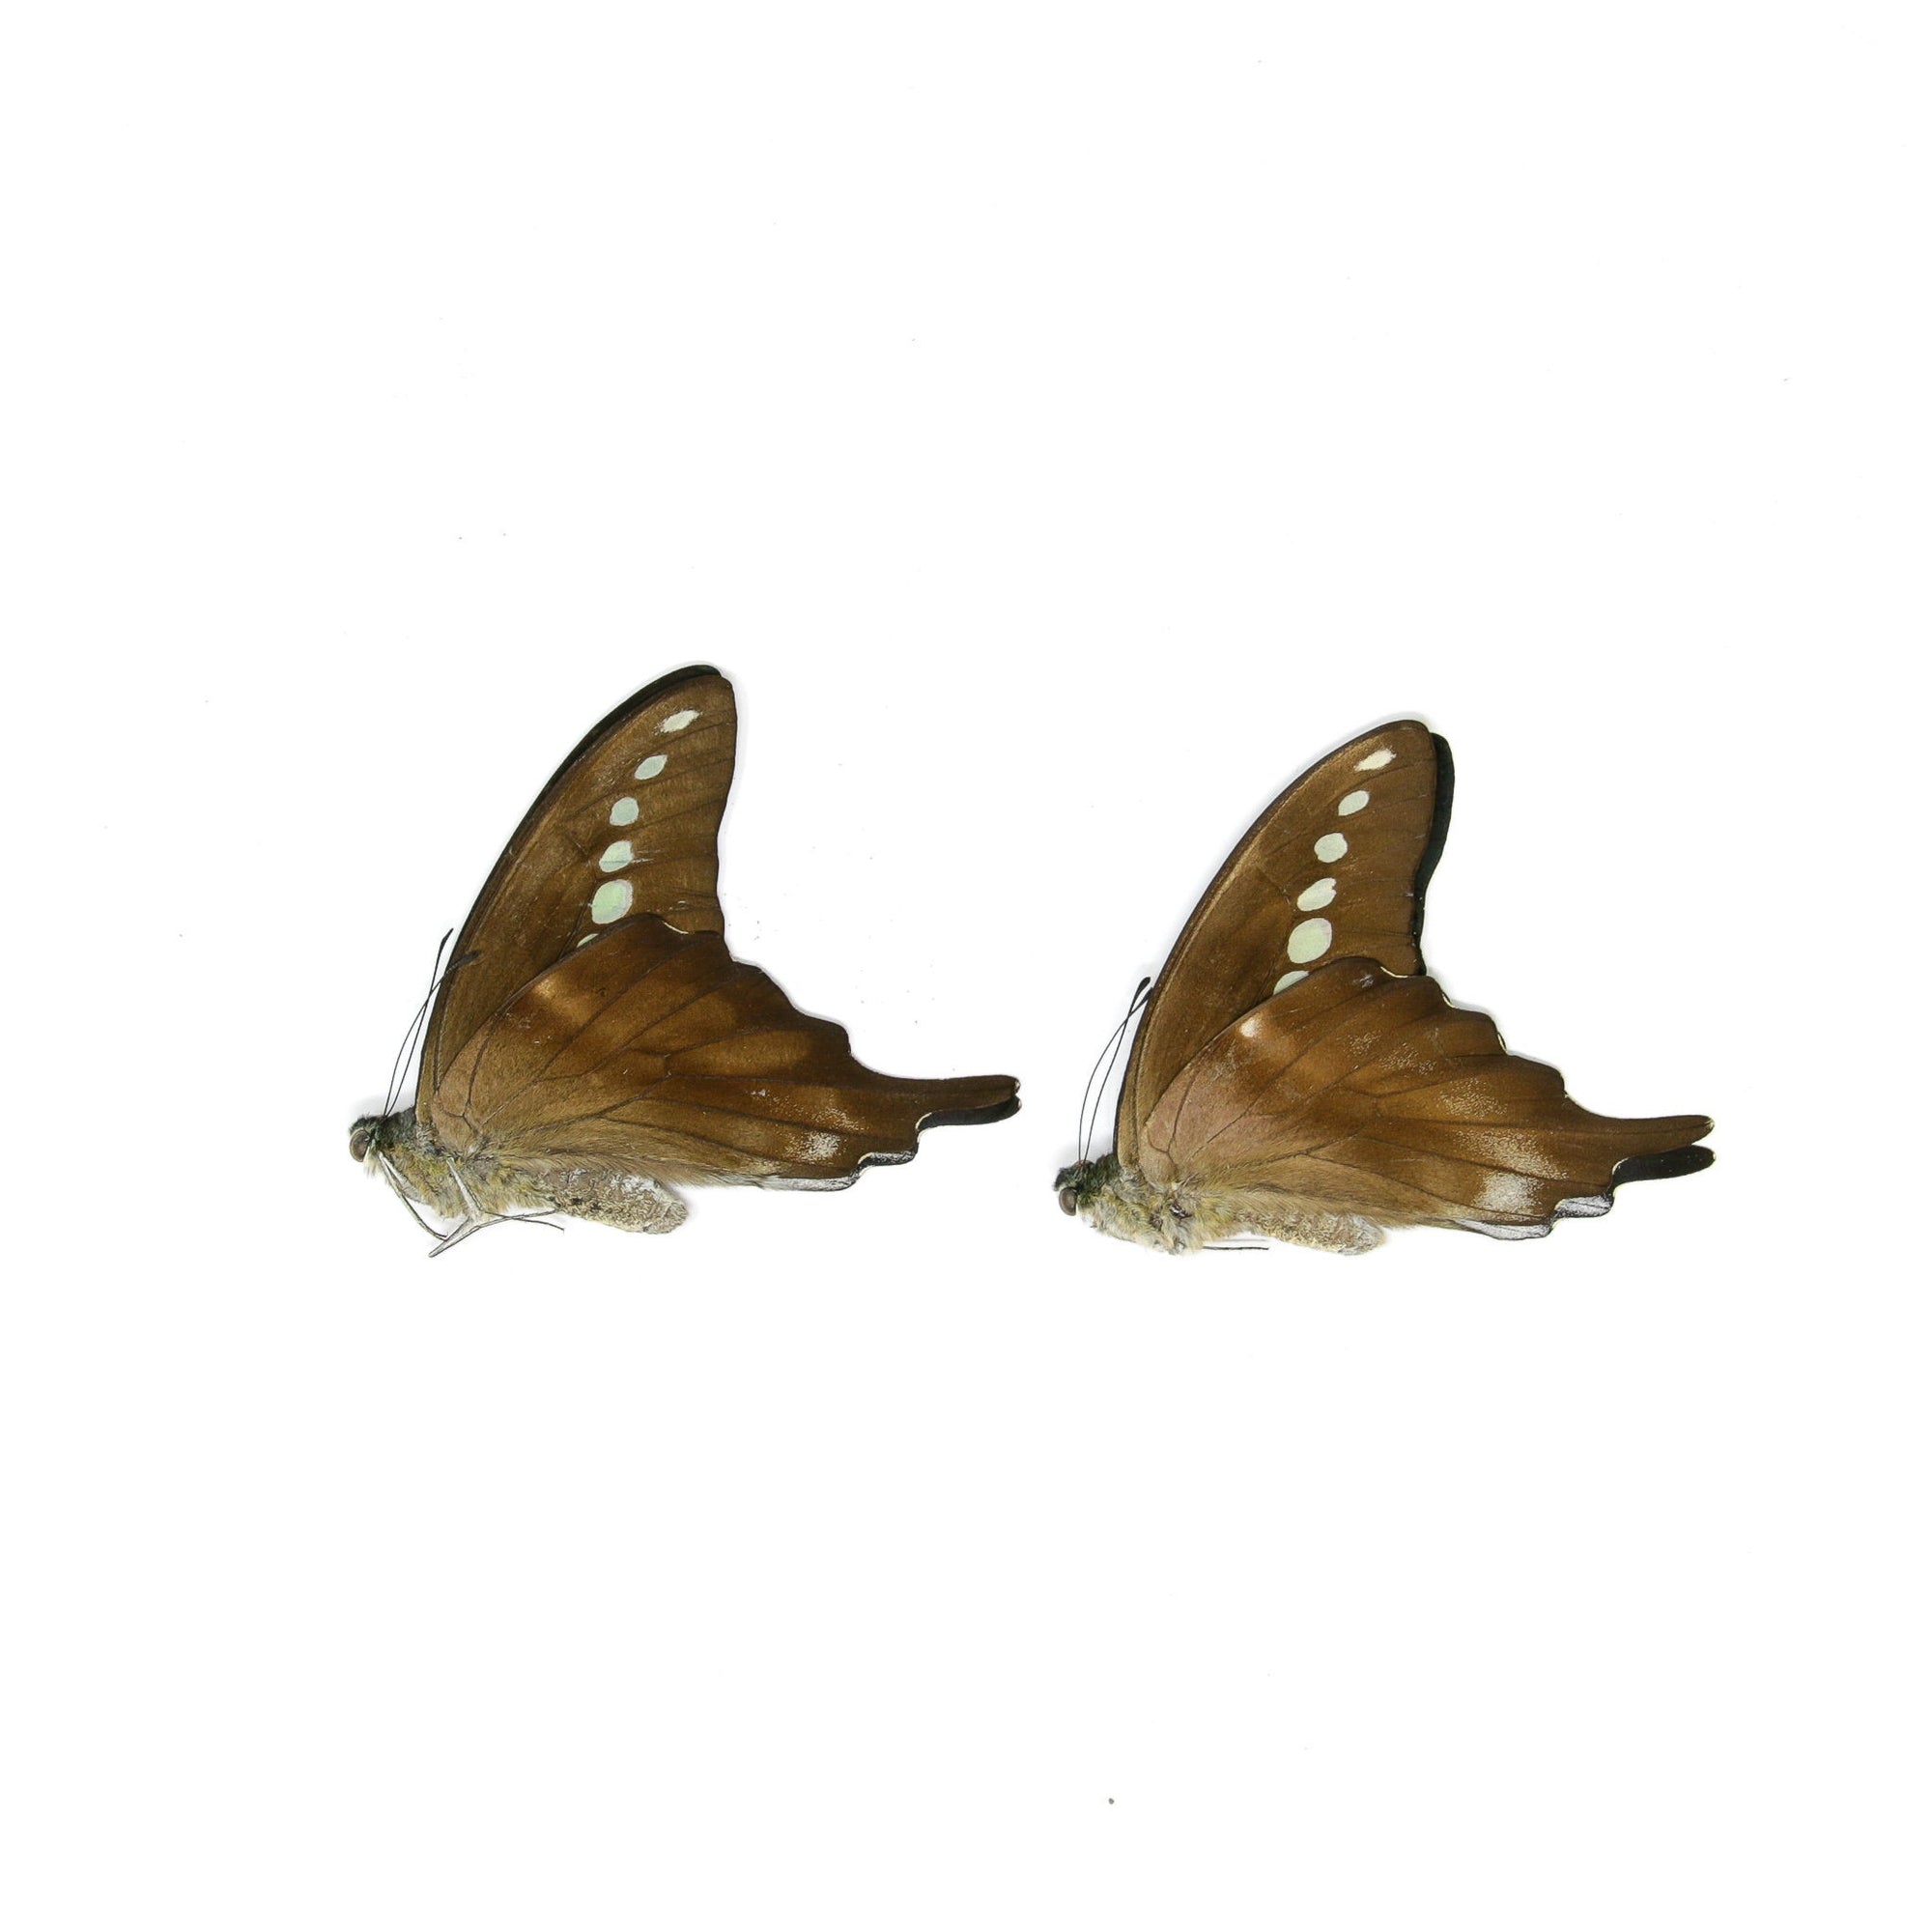 2 x Green Banded Swallowtail | Graphium codrus | Dry-Preserved Unmounted Butterfly Specimens A1